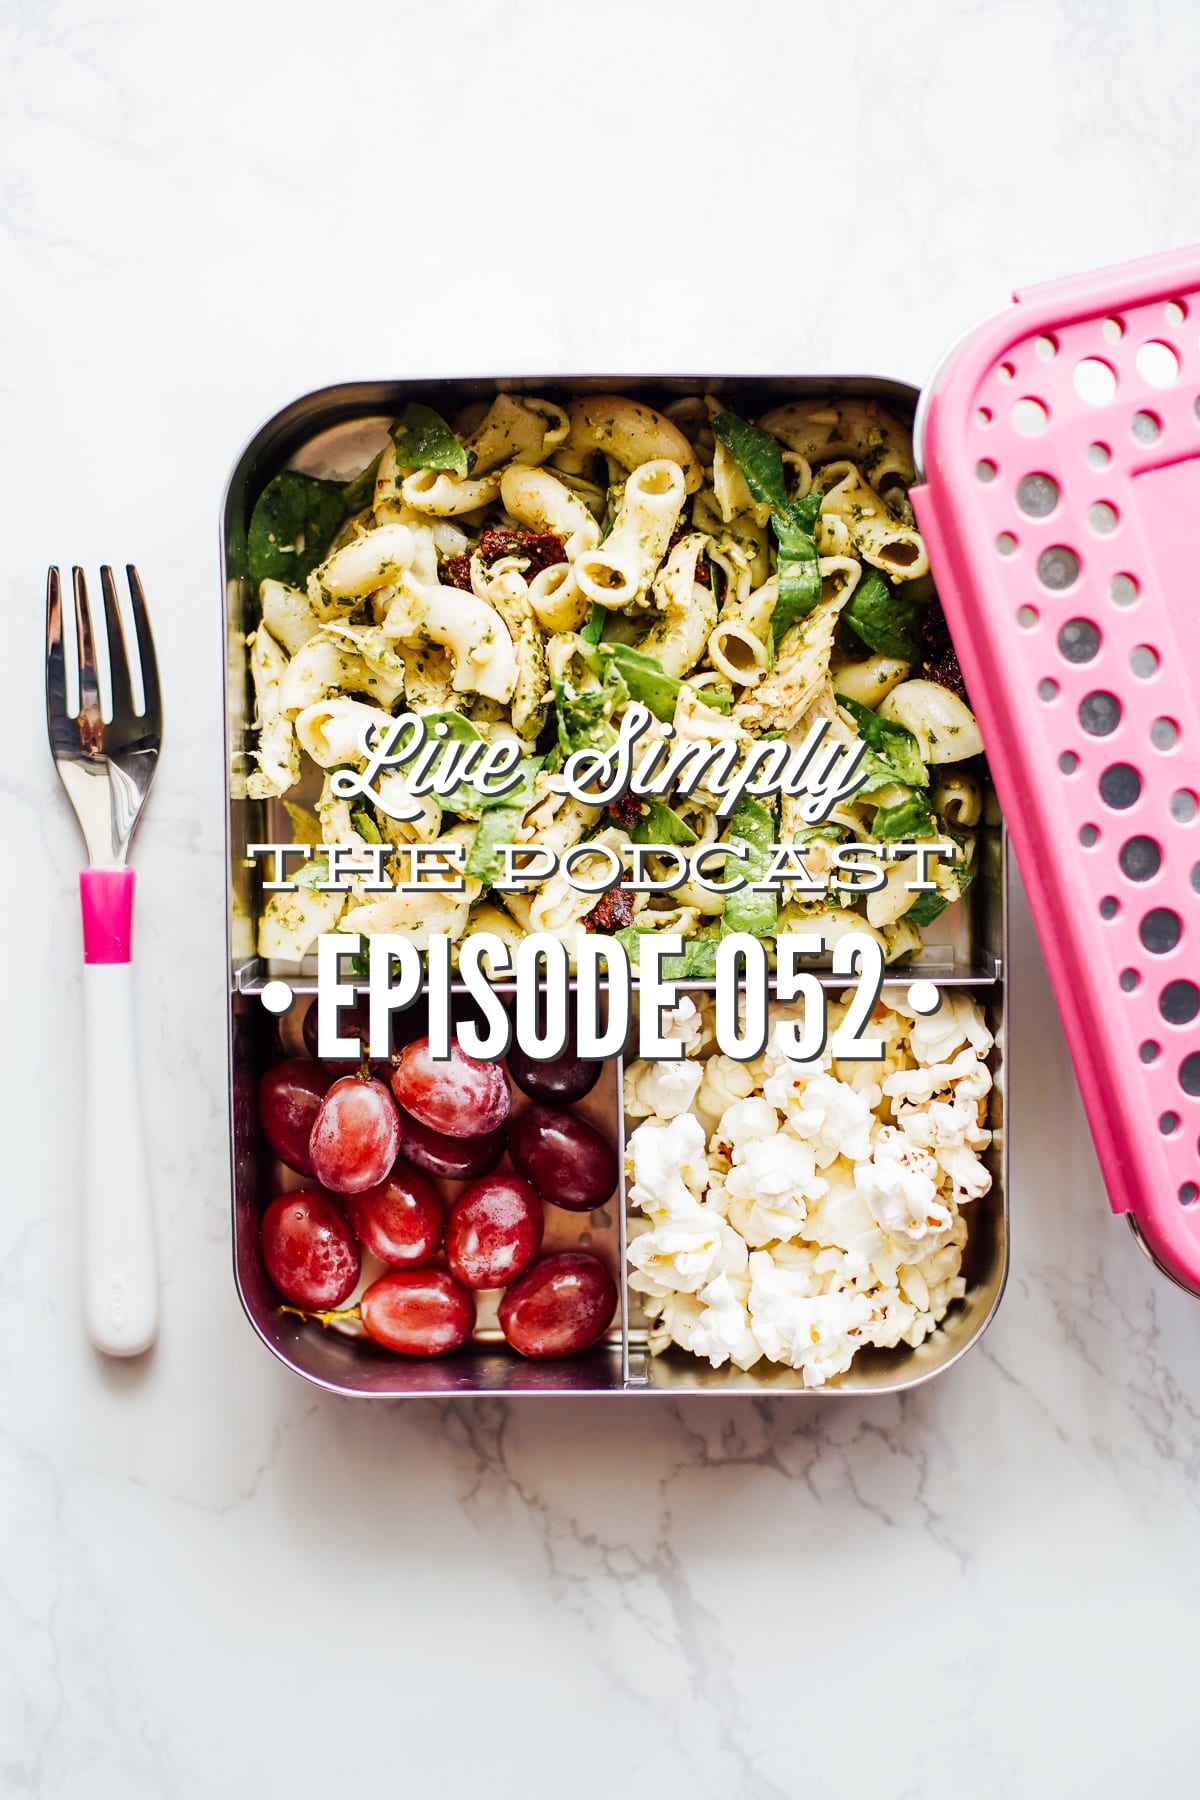 Podcast 052: Changing School Lunch with Hilary Boynton